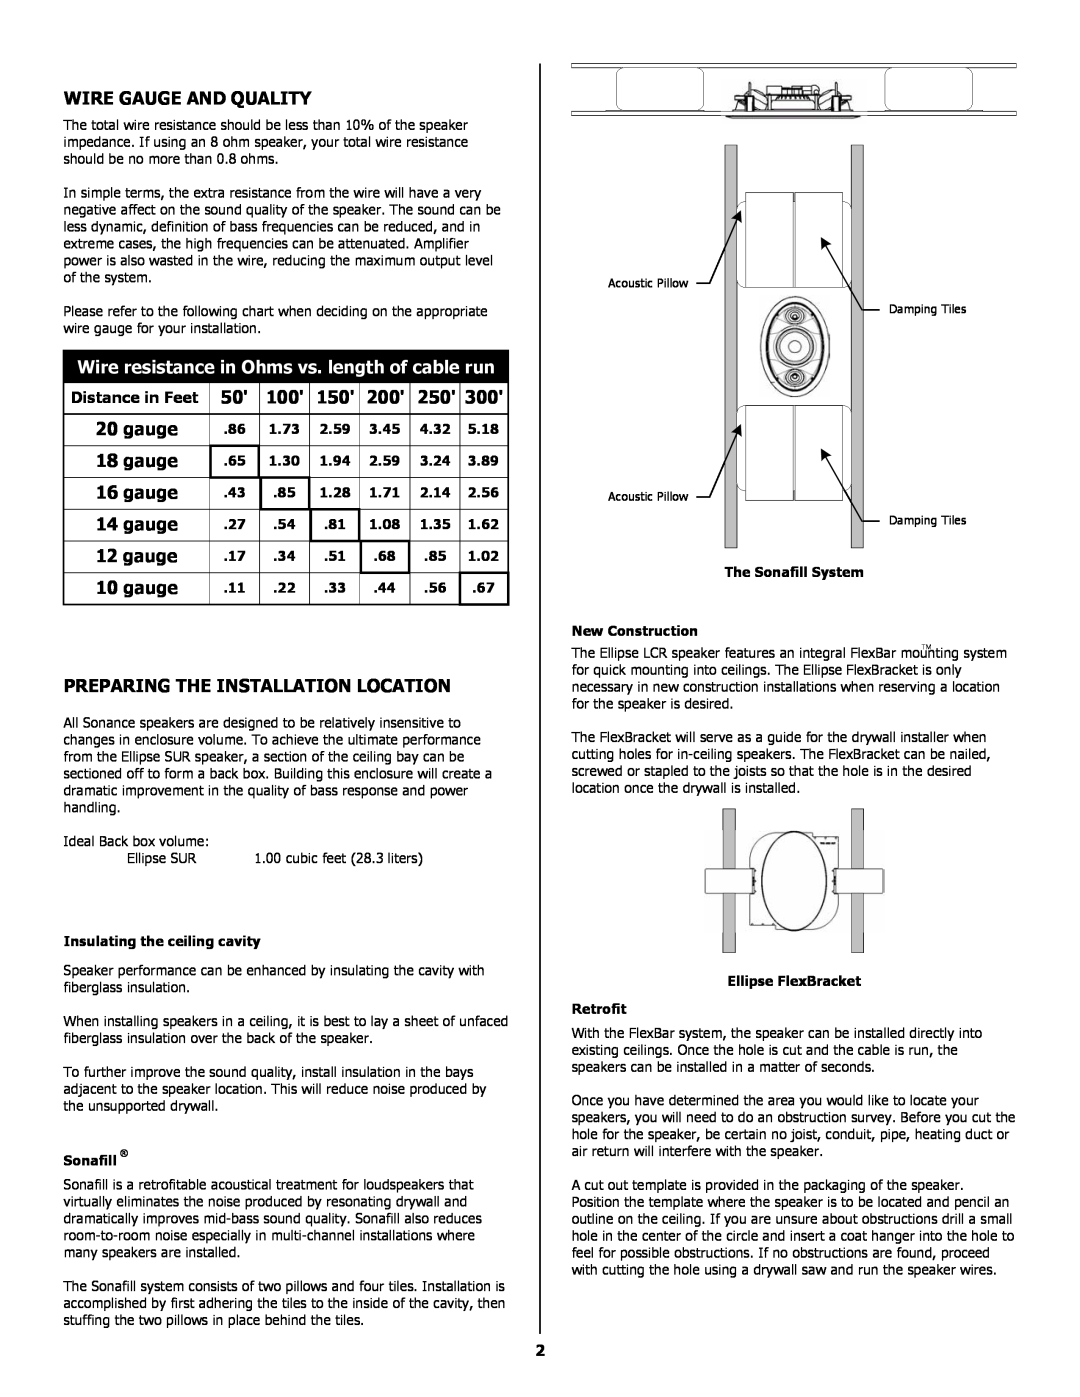 Sonance 33-2931 installation instructions Wire Gauge And Quality, Wire resistance in Ohms vs. length of cable run 